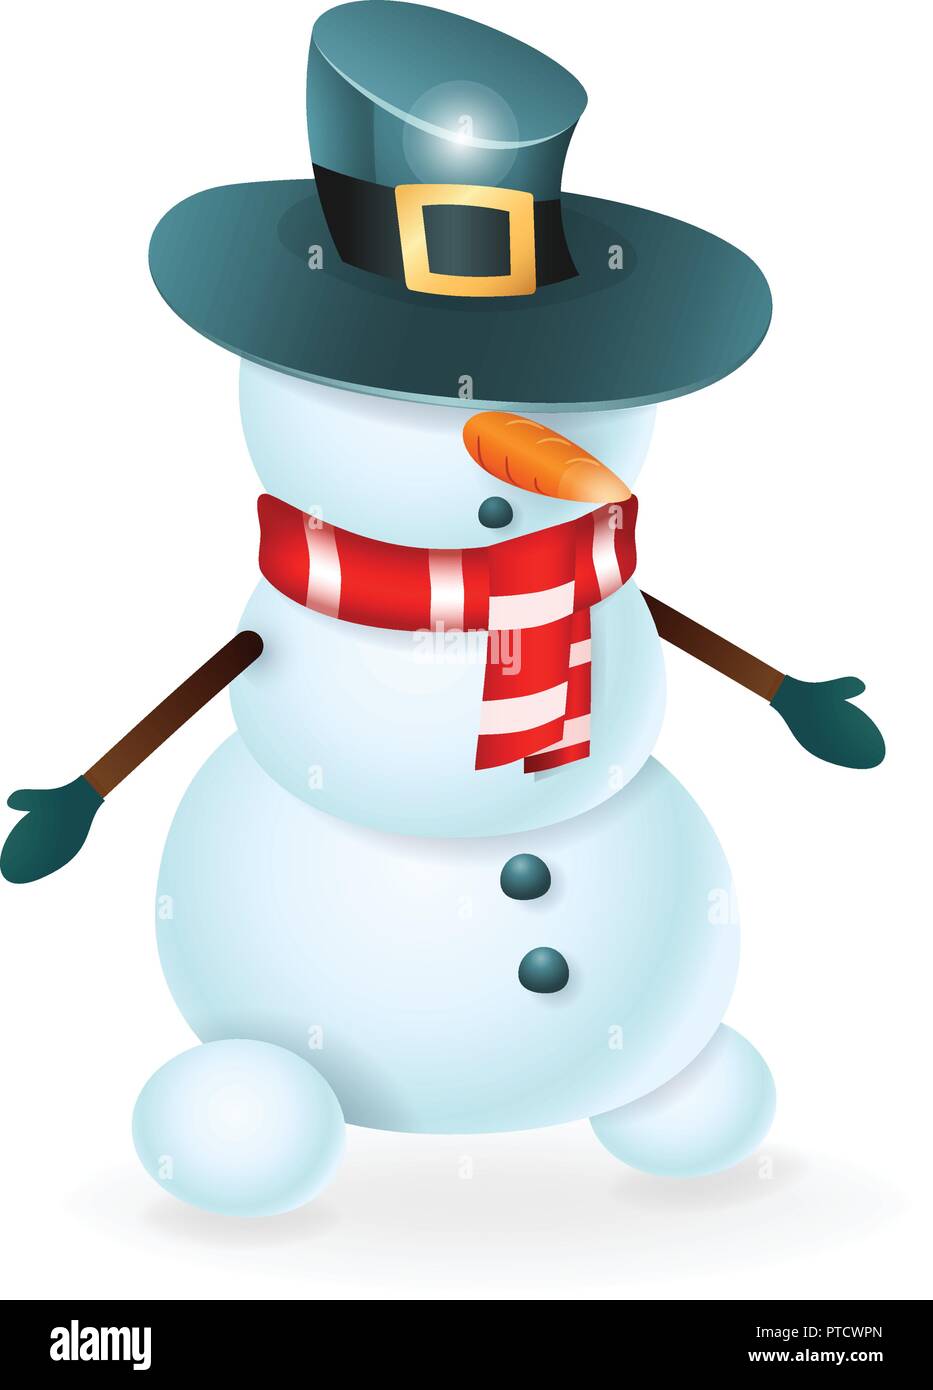 Cute Snowman with hat over its eyes vector illustration Stock Vector